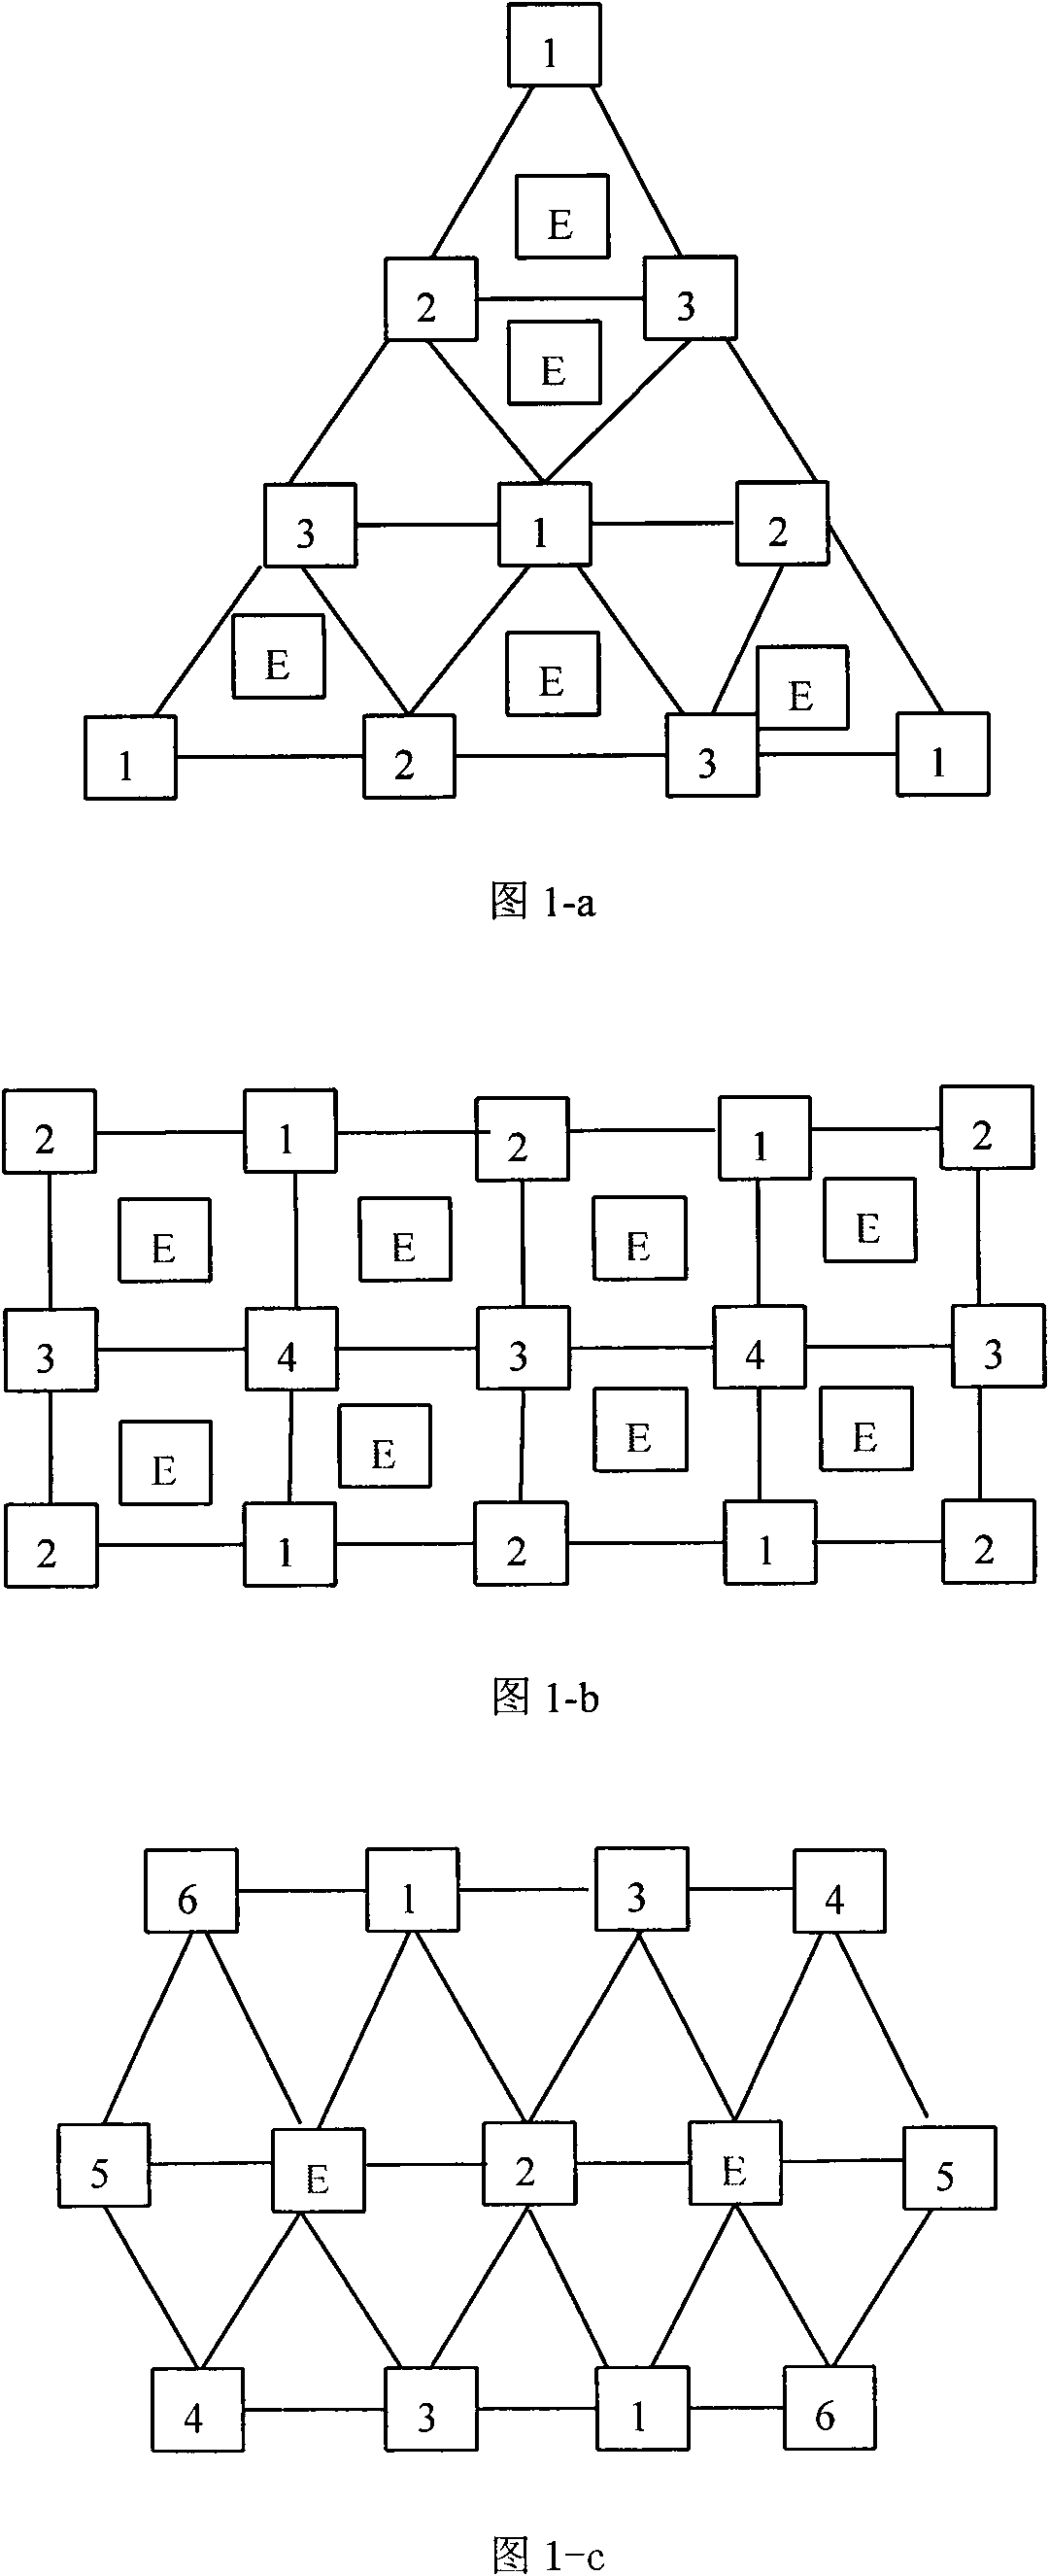 Method for treating contaminated soil by combining in-situ heat strengthening and soil vapor extraction technology